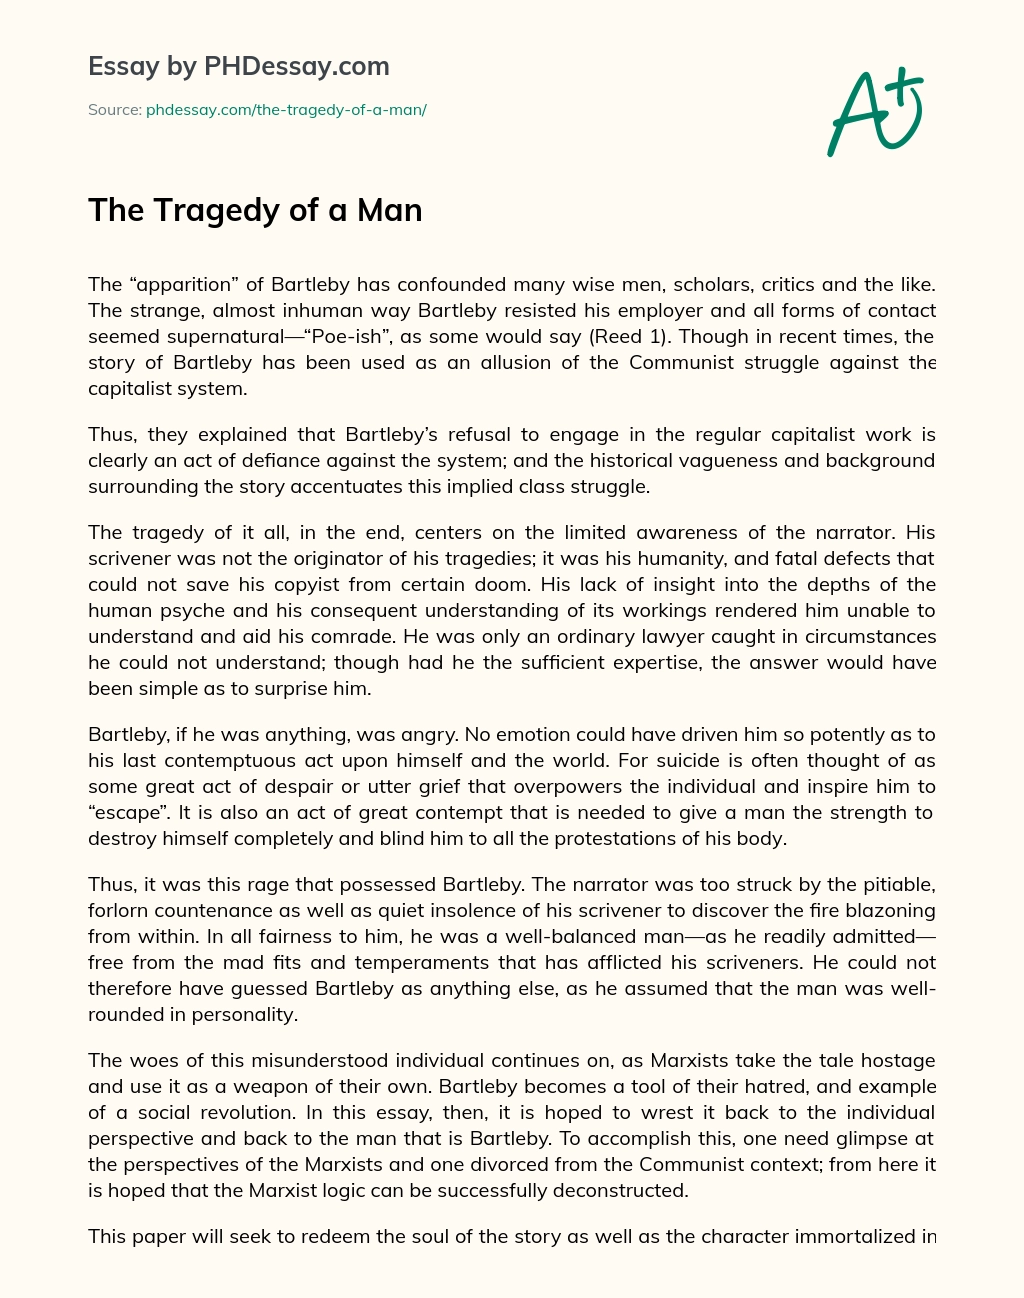 The Tragedy of a Man essay